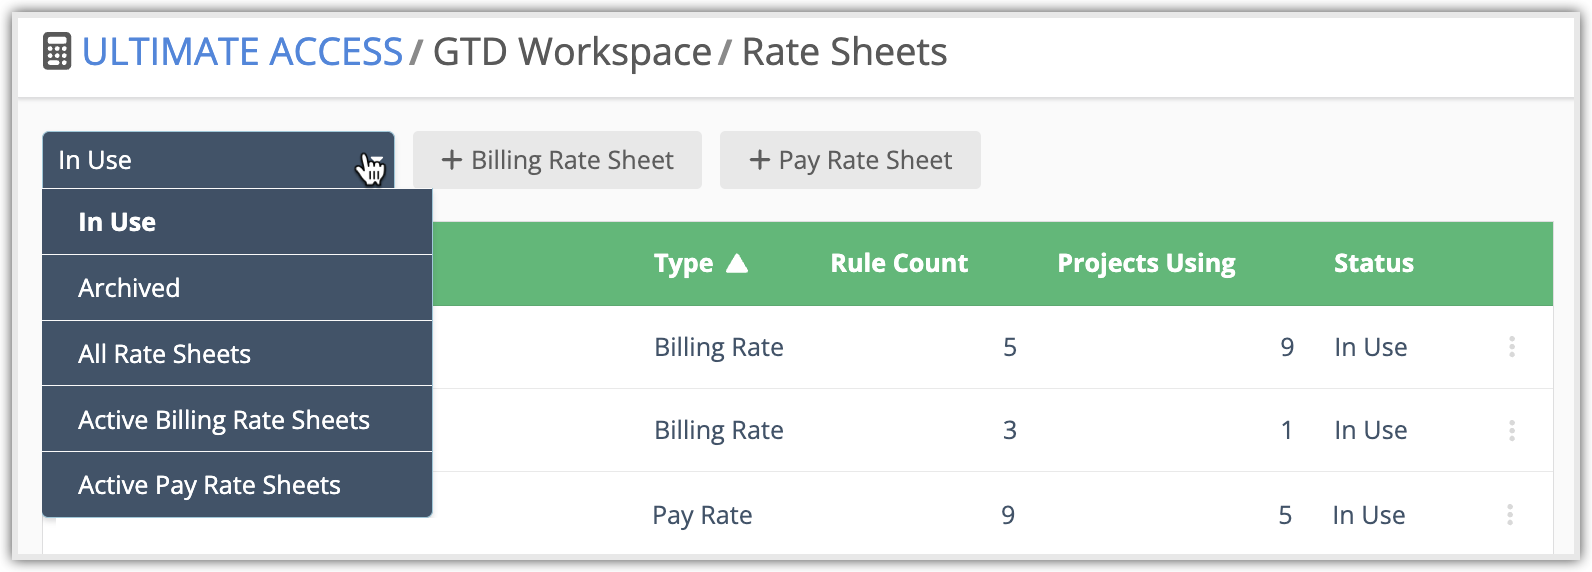 Pay rate sheets